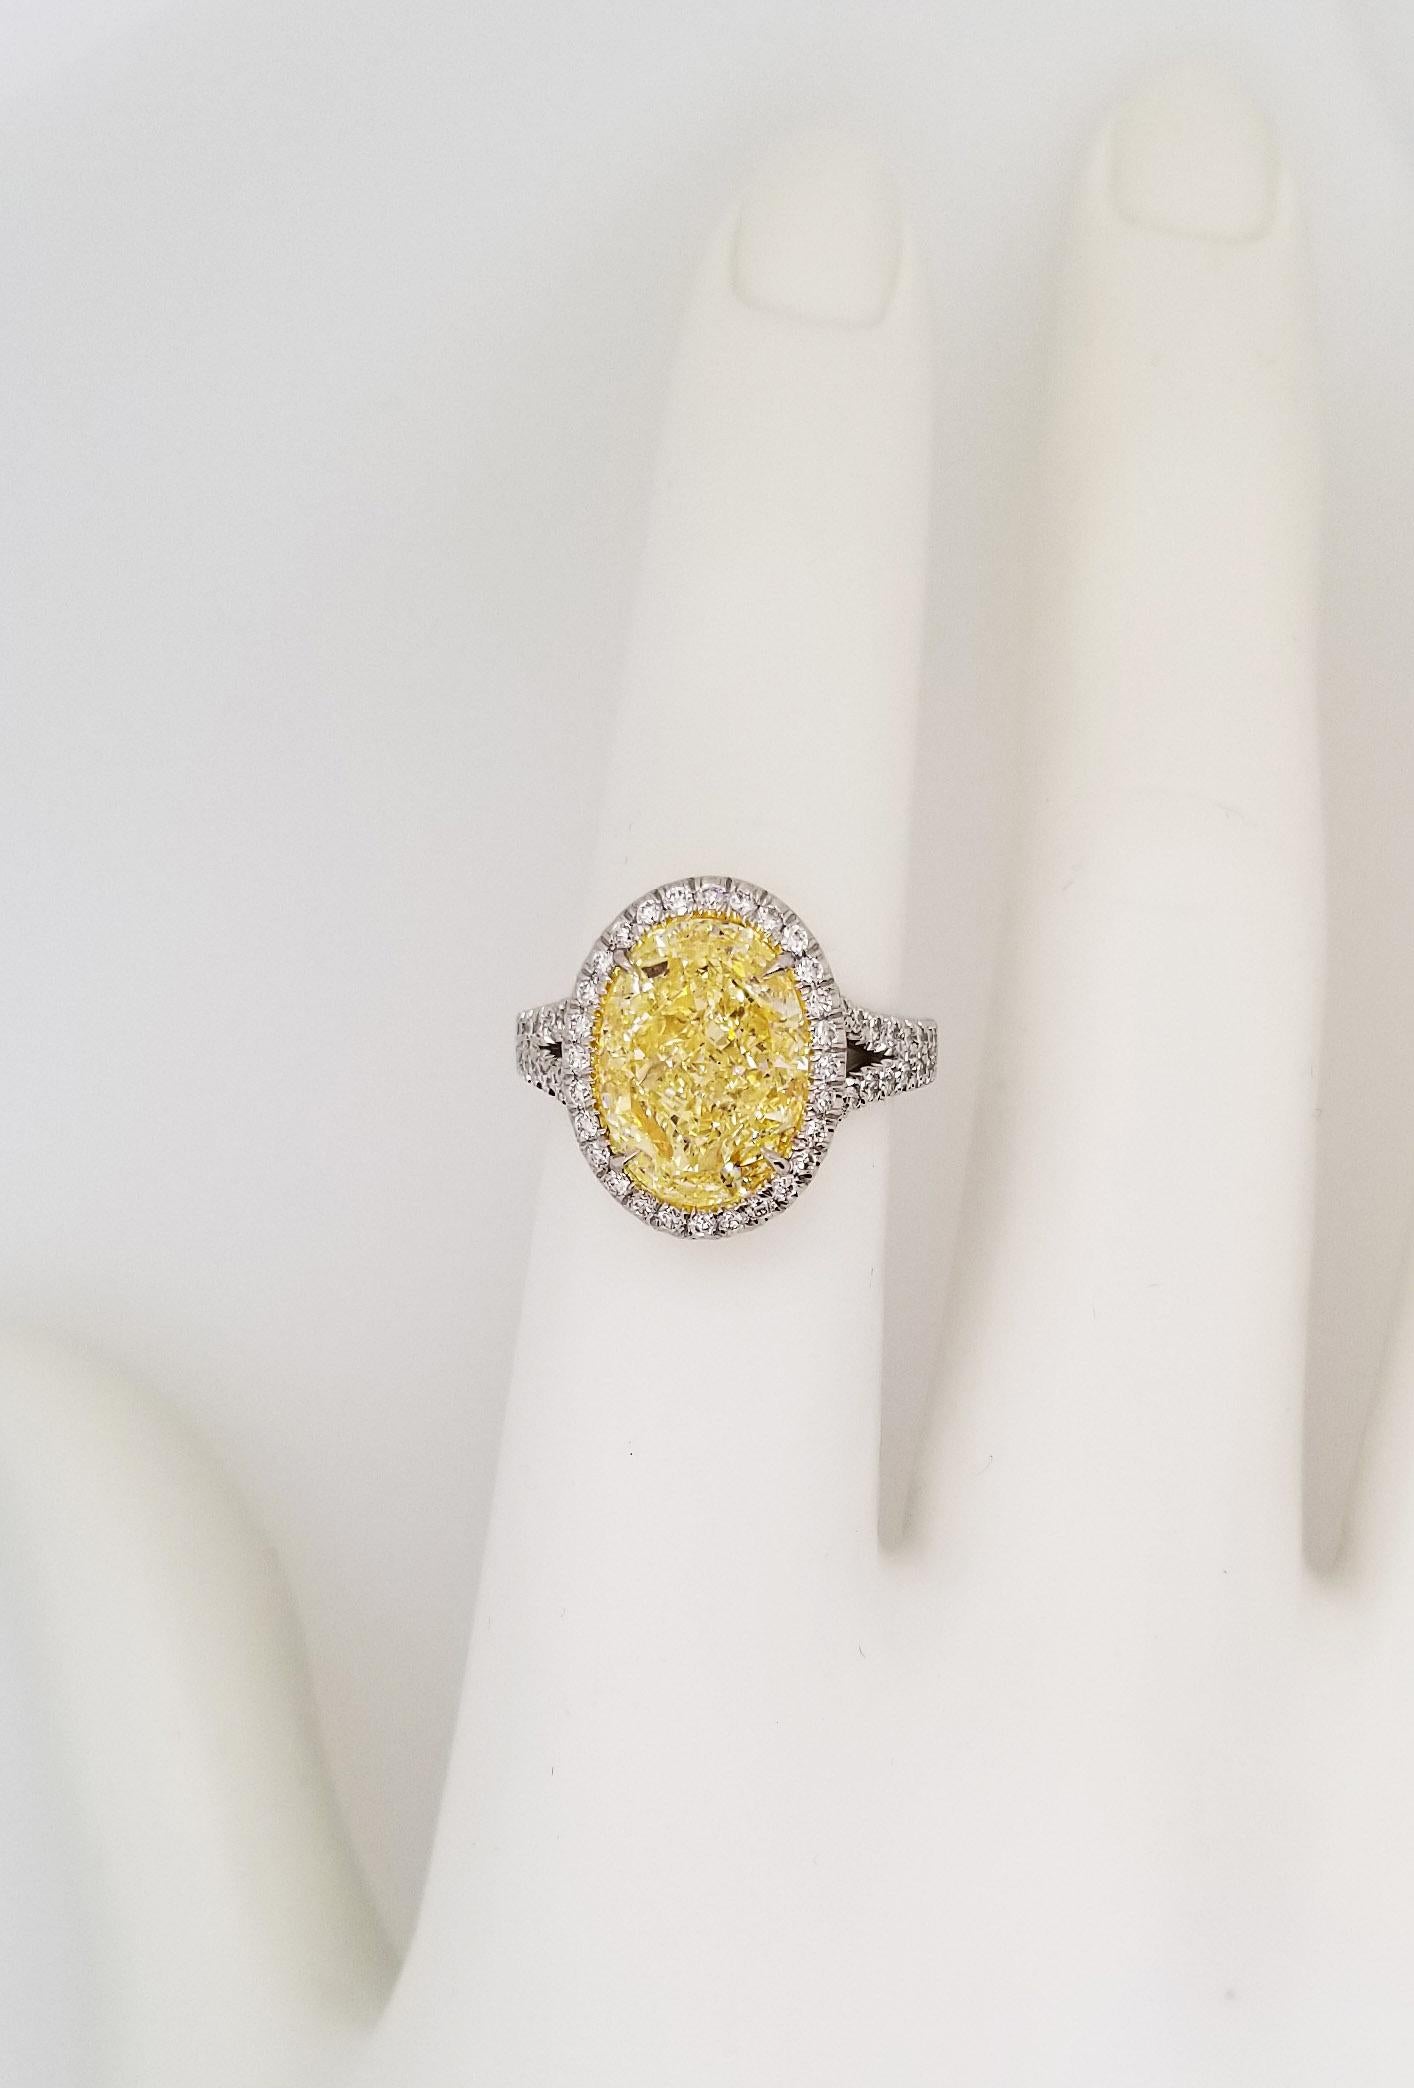 Contemporary SCARSELLI 5 Carat Oval Fancy Light Yellow Diamond Engagement Ring in Platinum